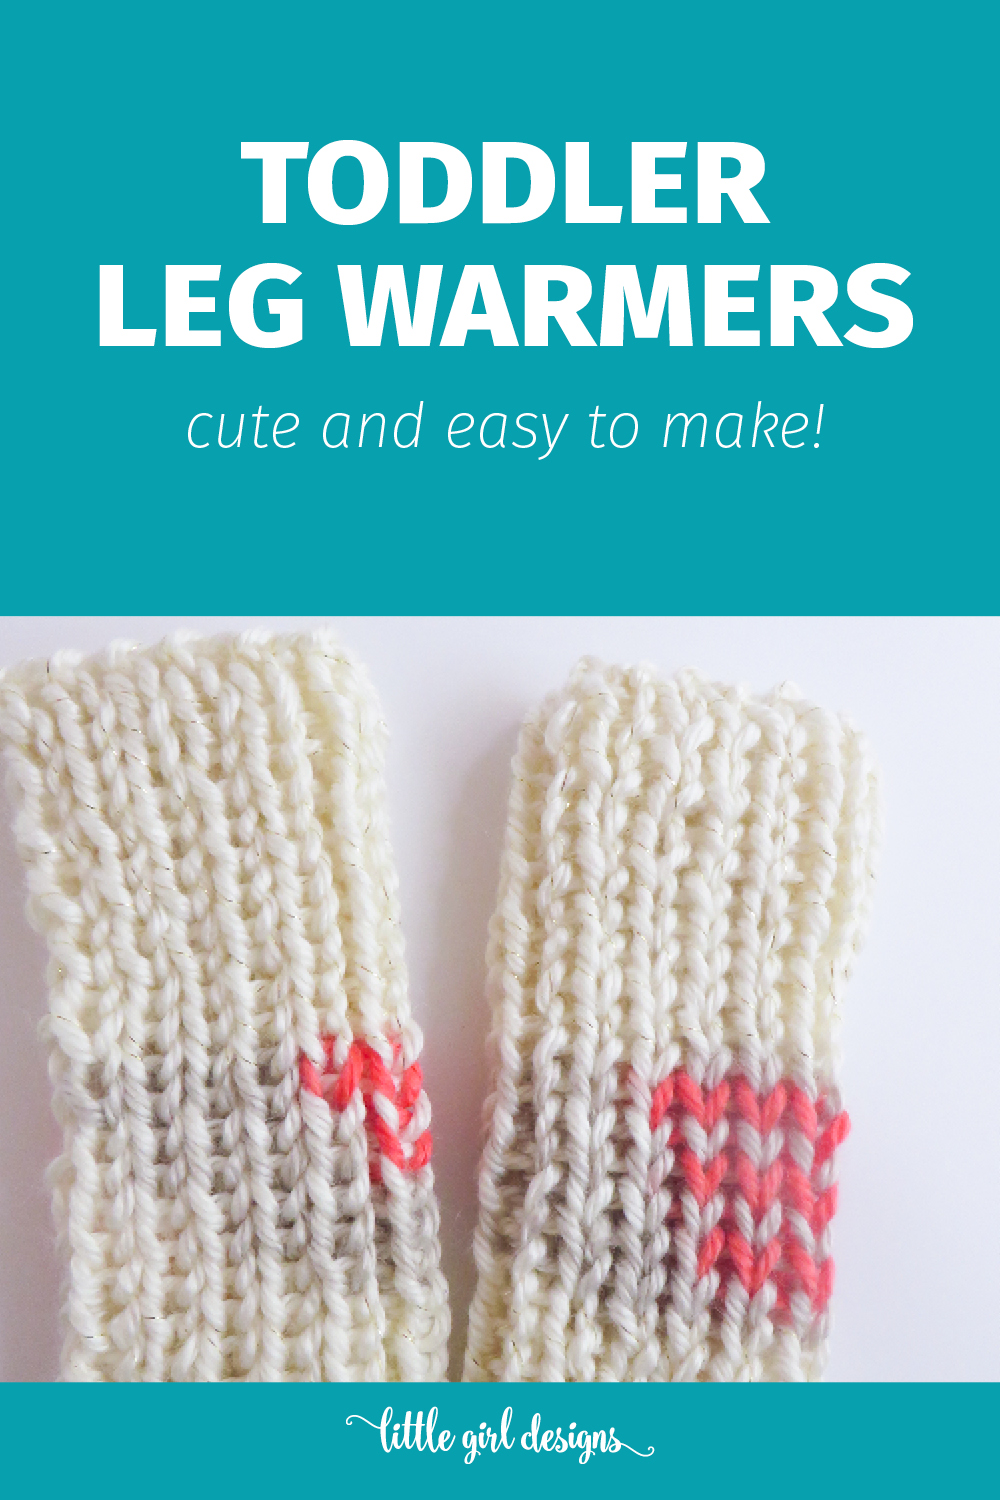 How to Make Toddler Leg Warmers